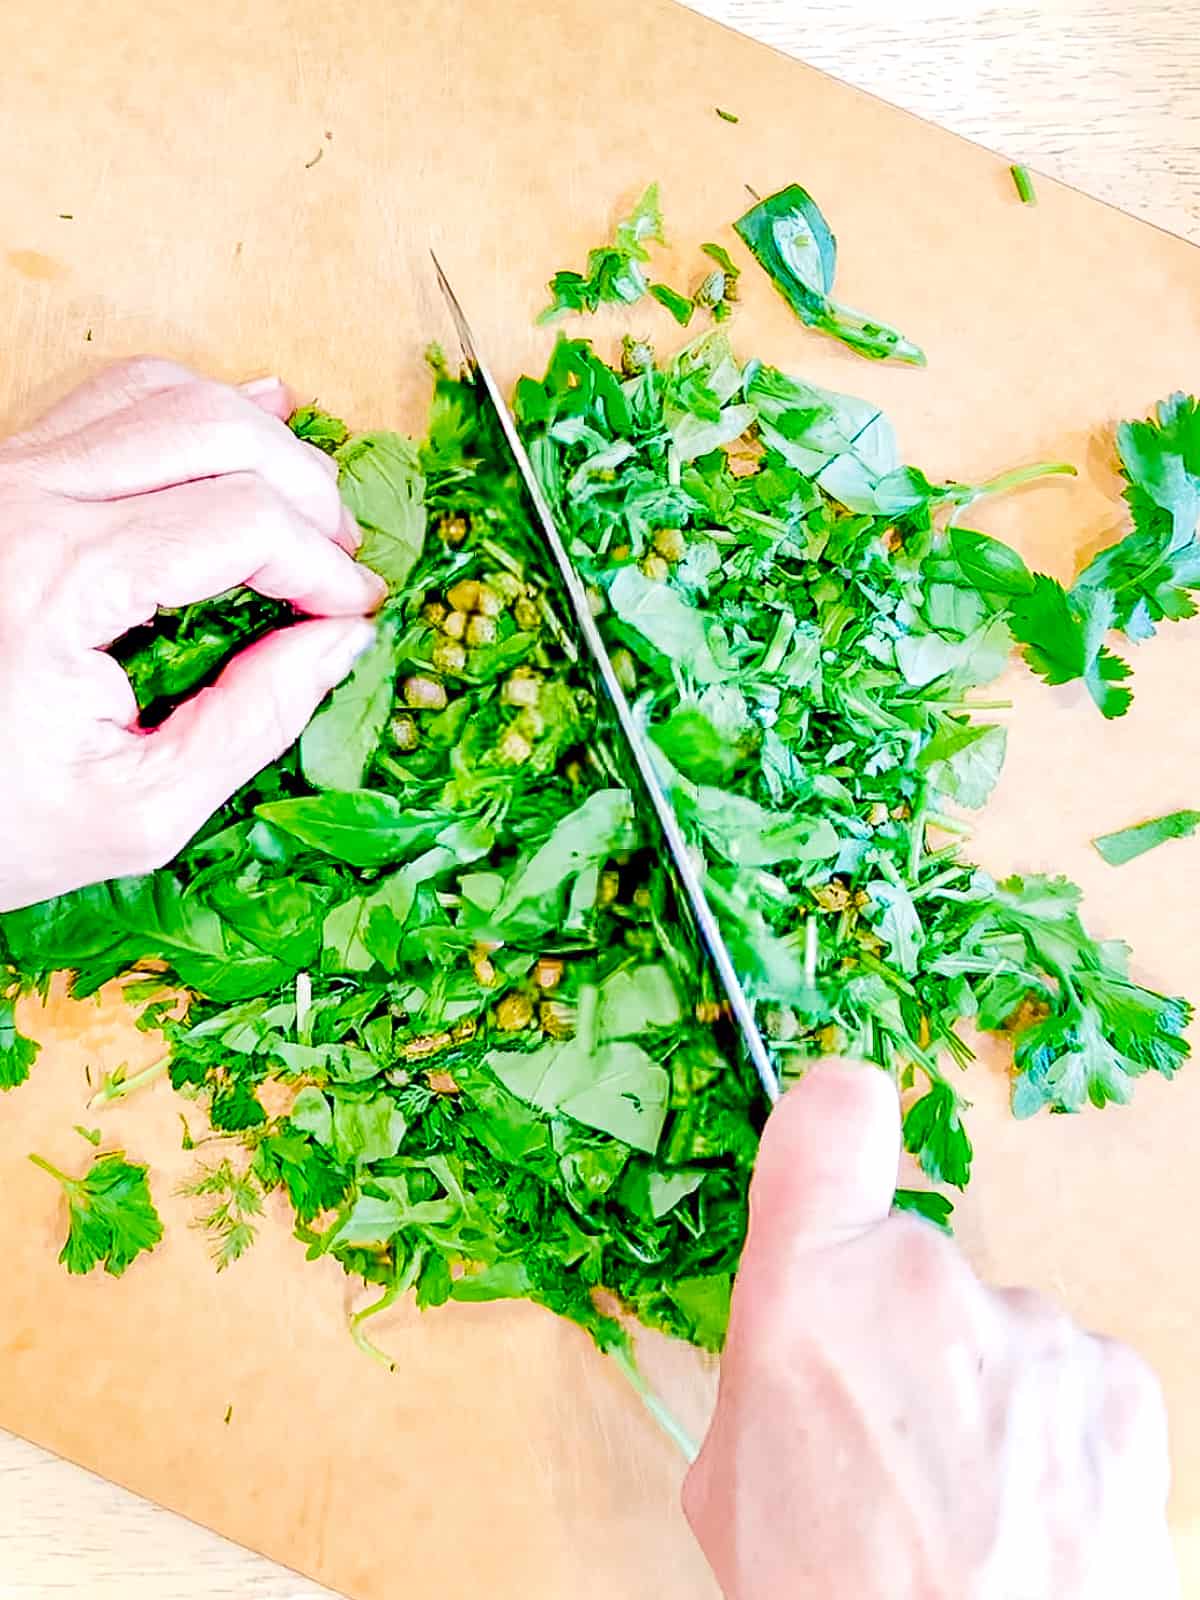 Chopping fresh herbs ands capers.